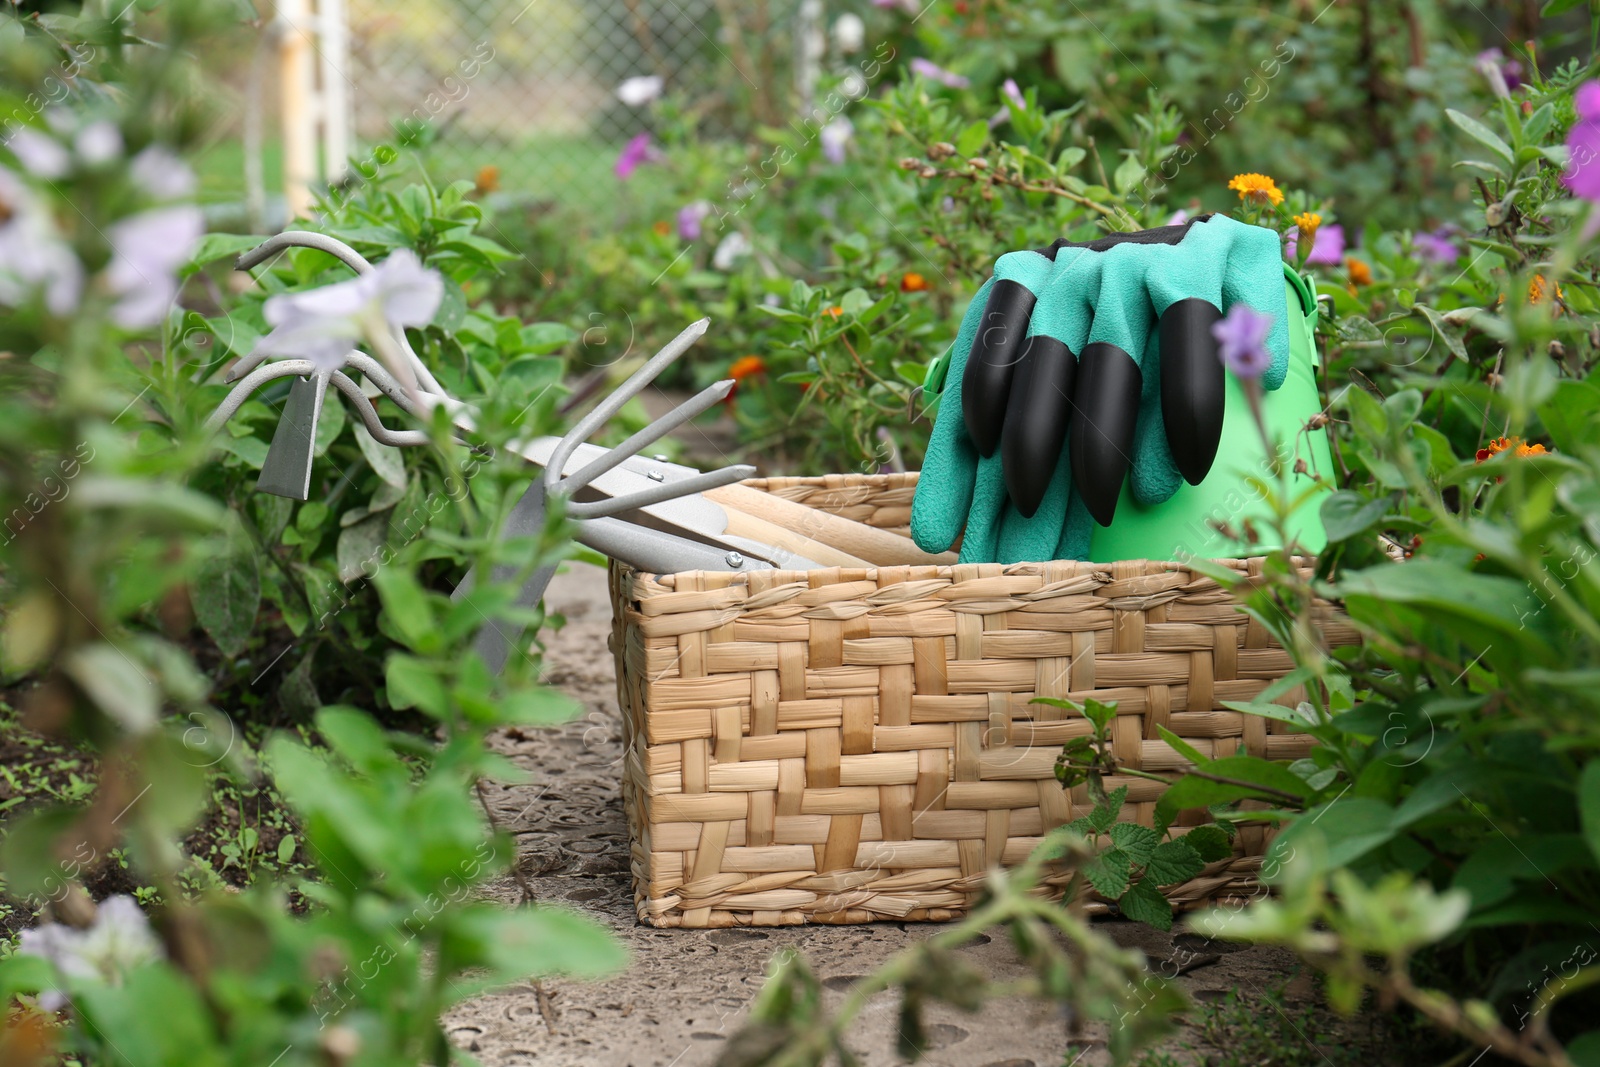 Photo of Wicker basket with gloves and gardening tools near flowers outdoors